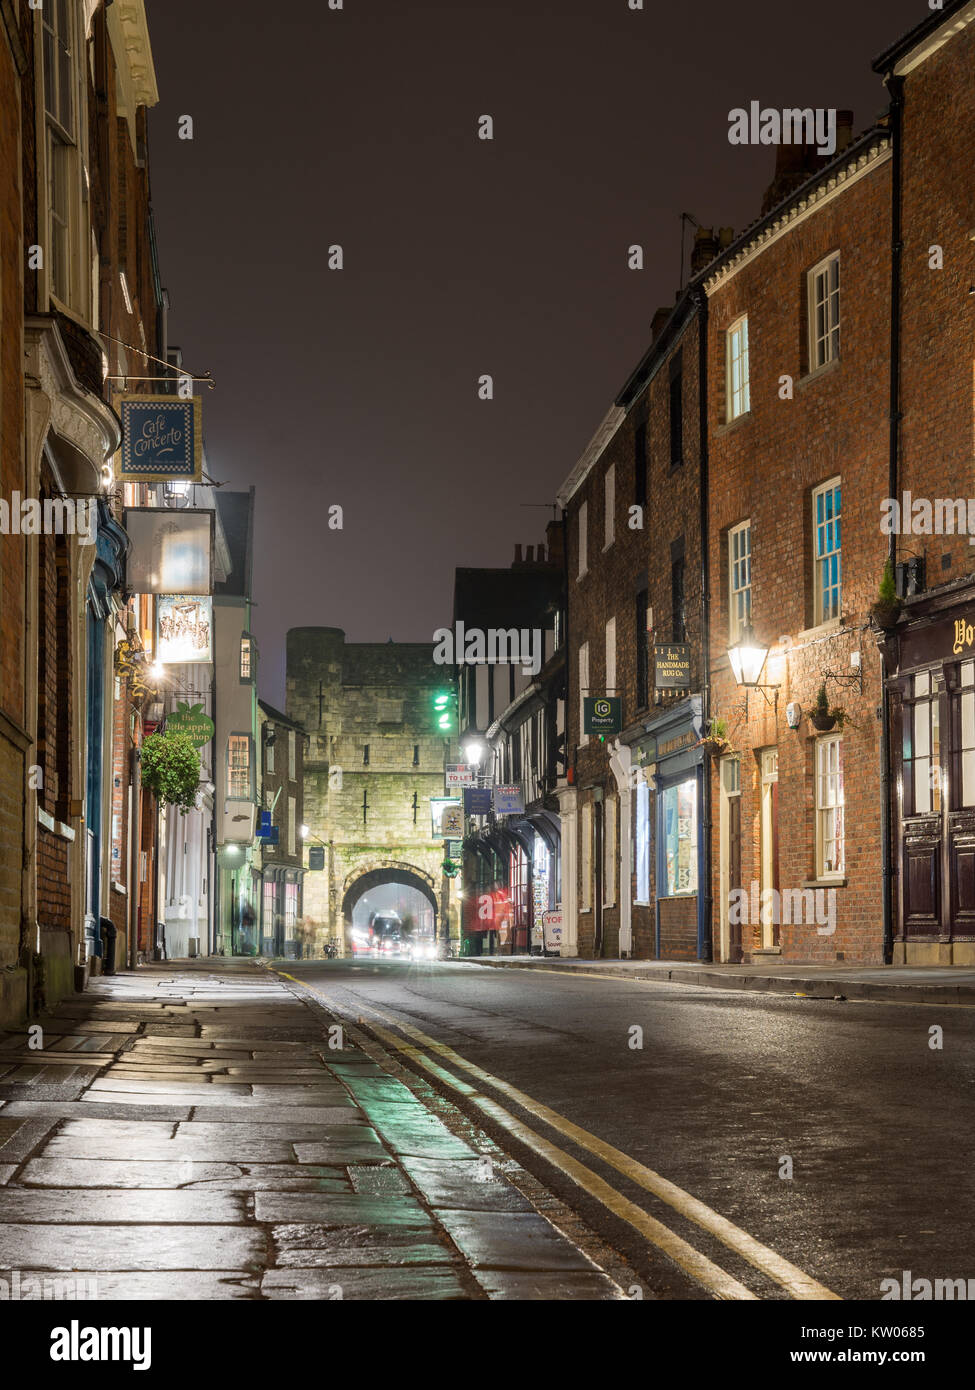 York, England, UK - January 27, 2017: High Petergate, a traditional terraced street of houses and shops, leads to Petergate in York's mediaeval city w Stock Photo